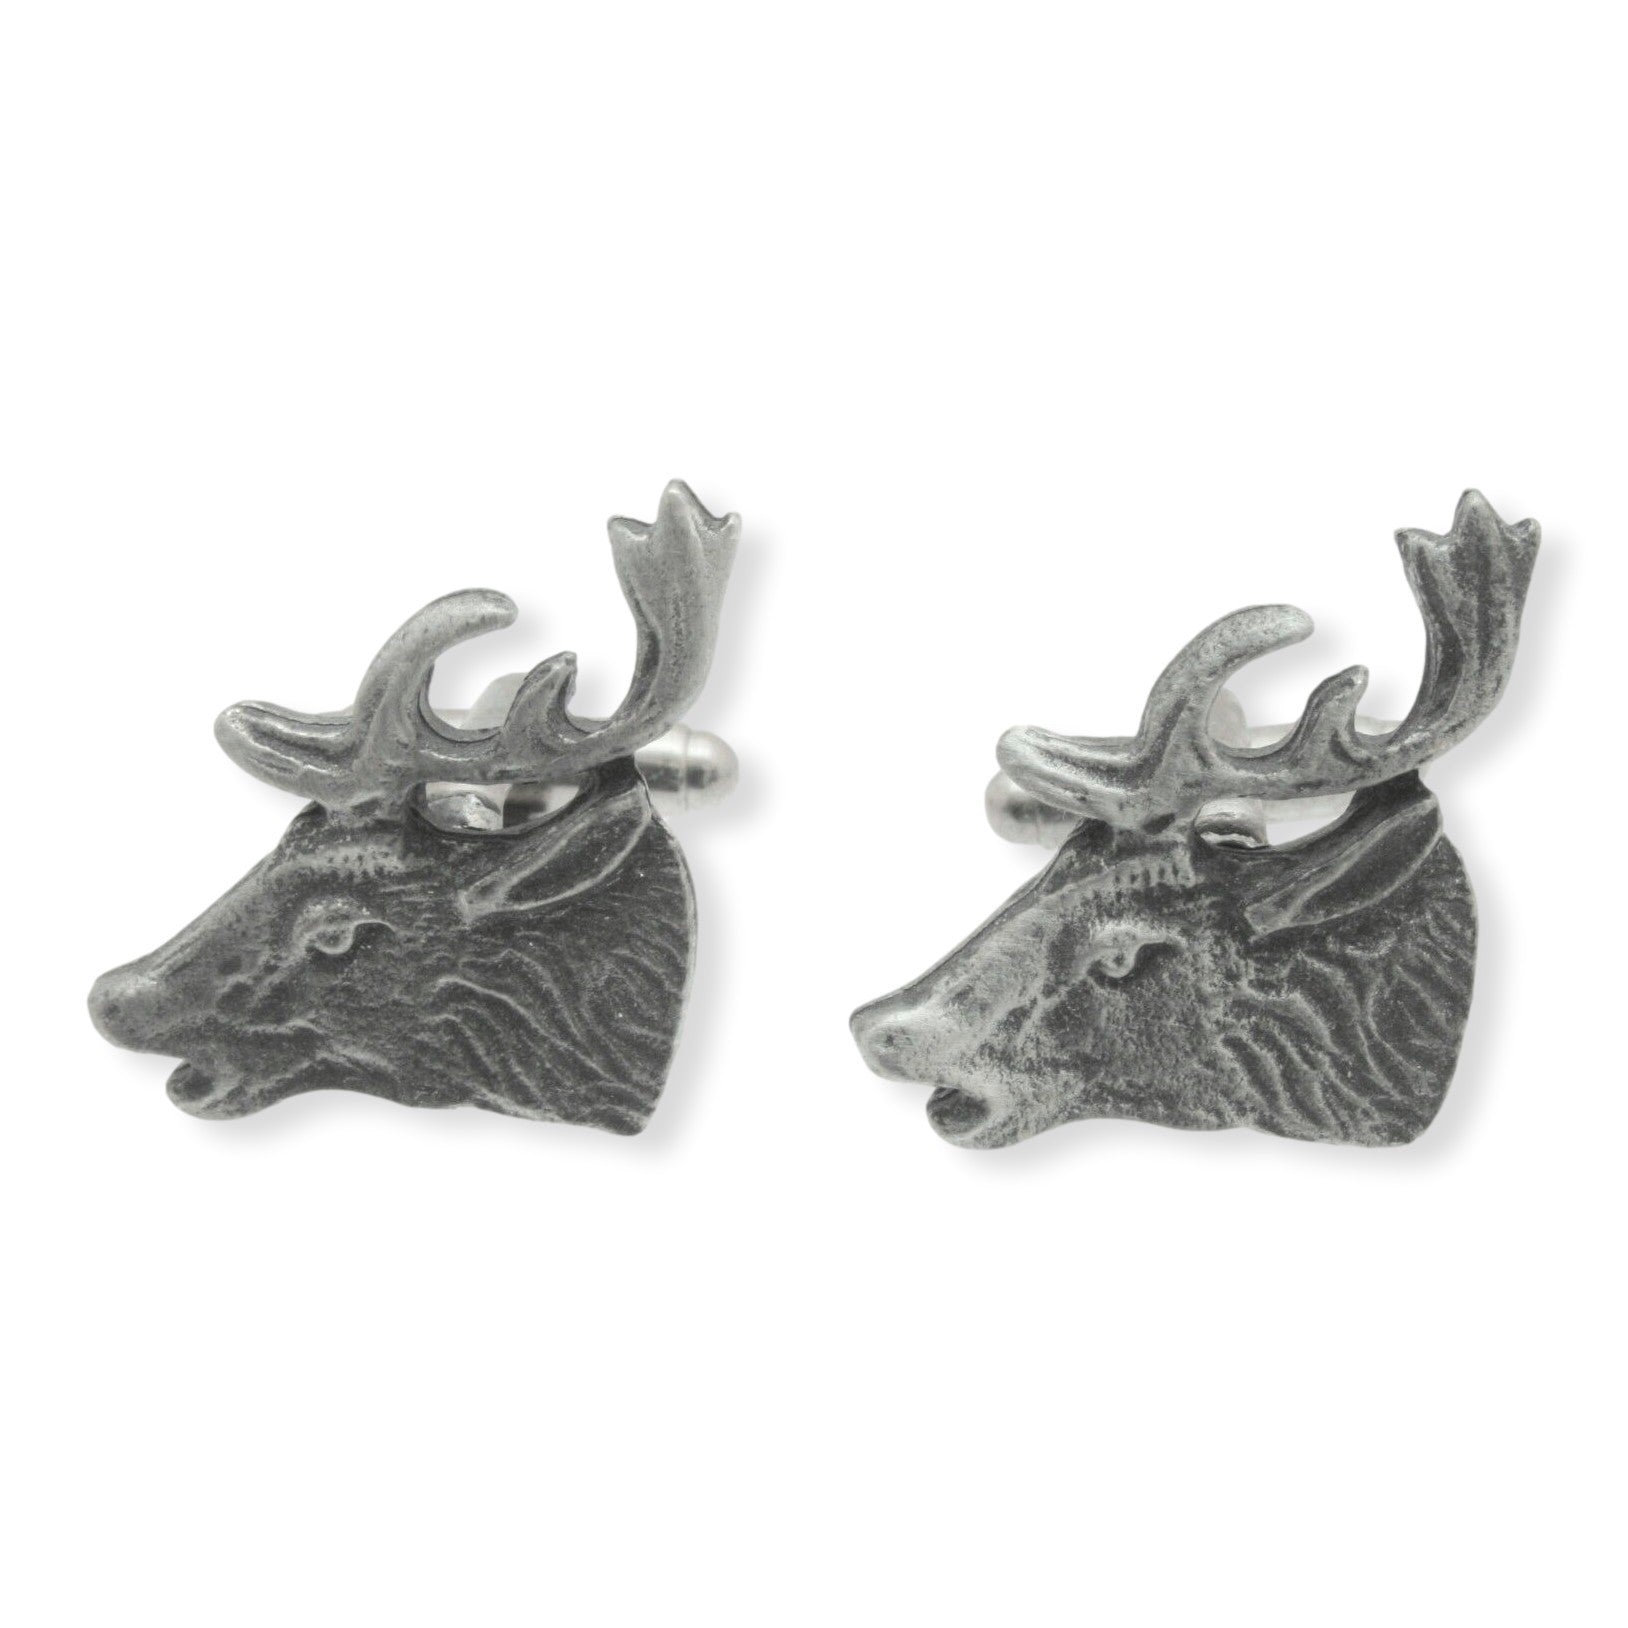 Pewter Roaring Stag